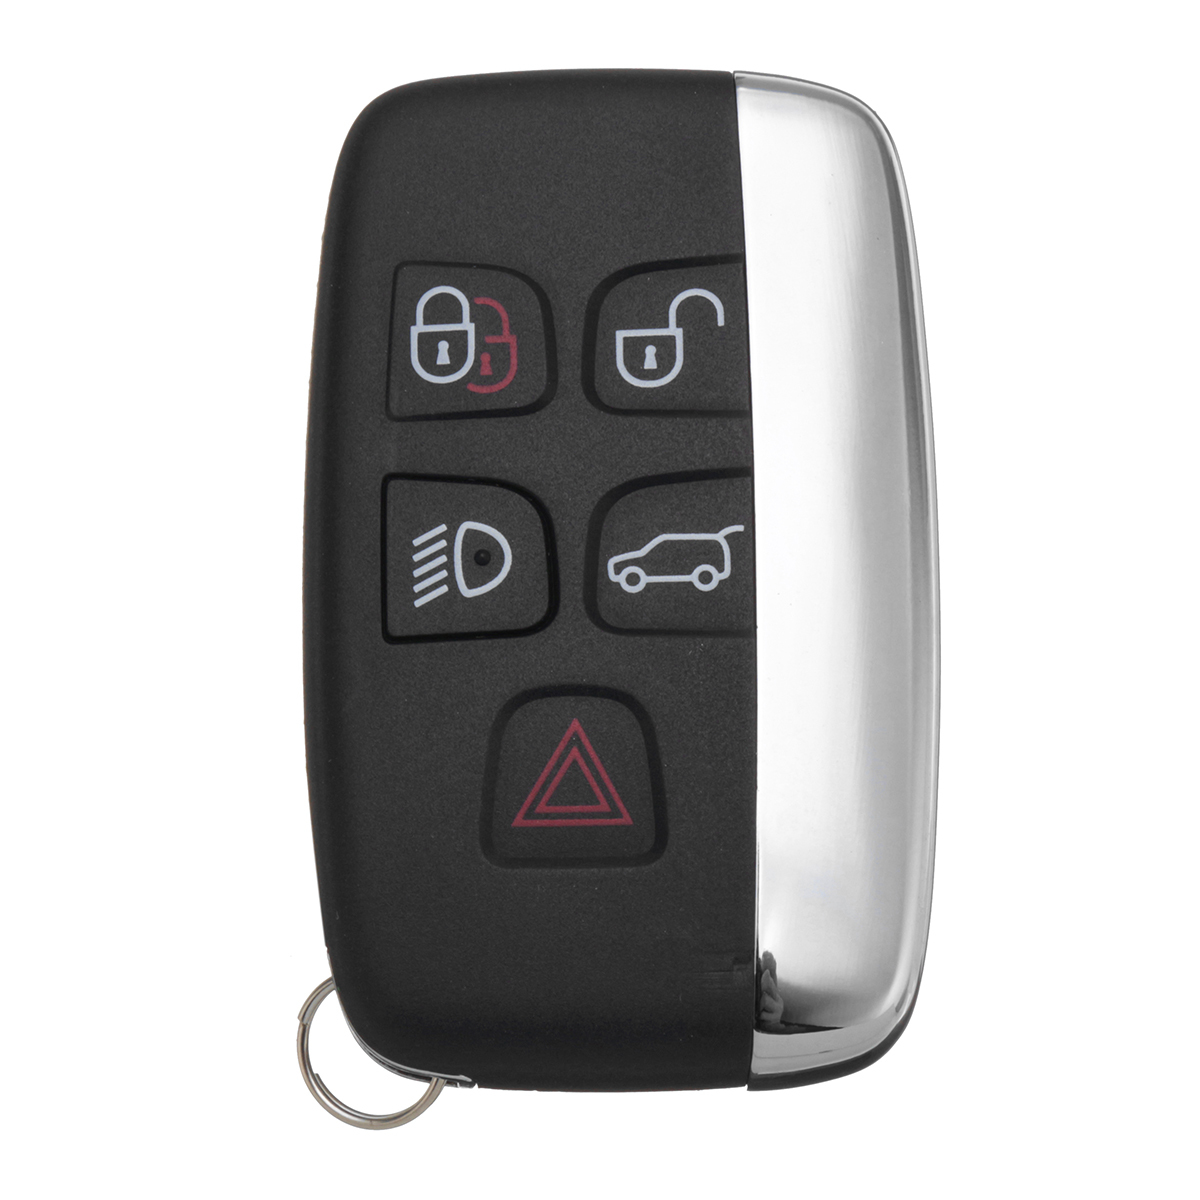 433Mhz Remote Key Fob w/ 7953 Chip for LAND ROVER RANGE ROVER SPORT EVOQUE 10-16 1